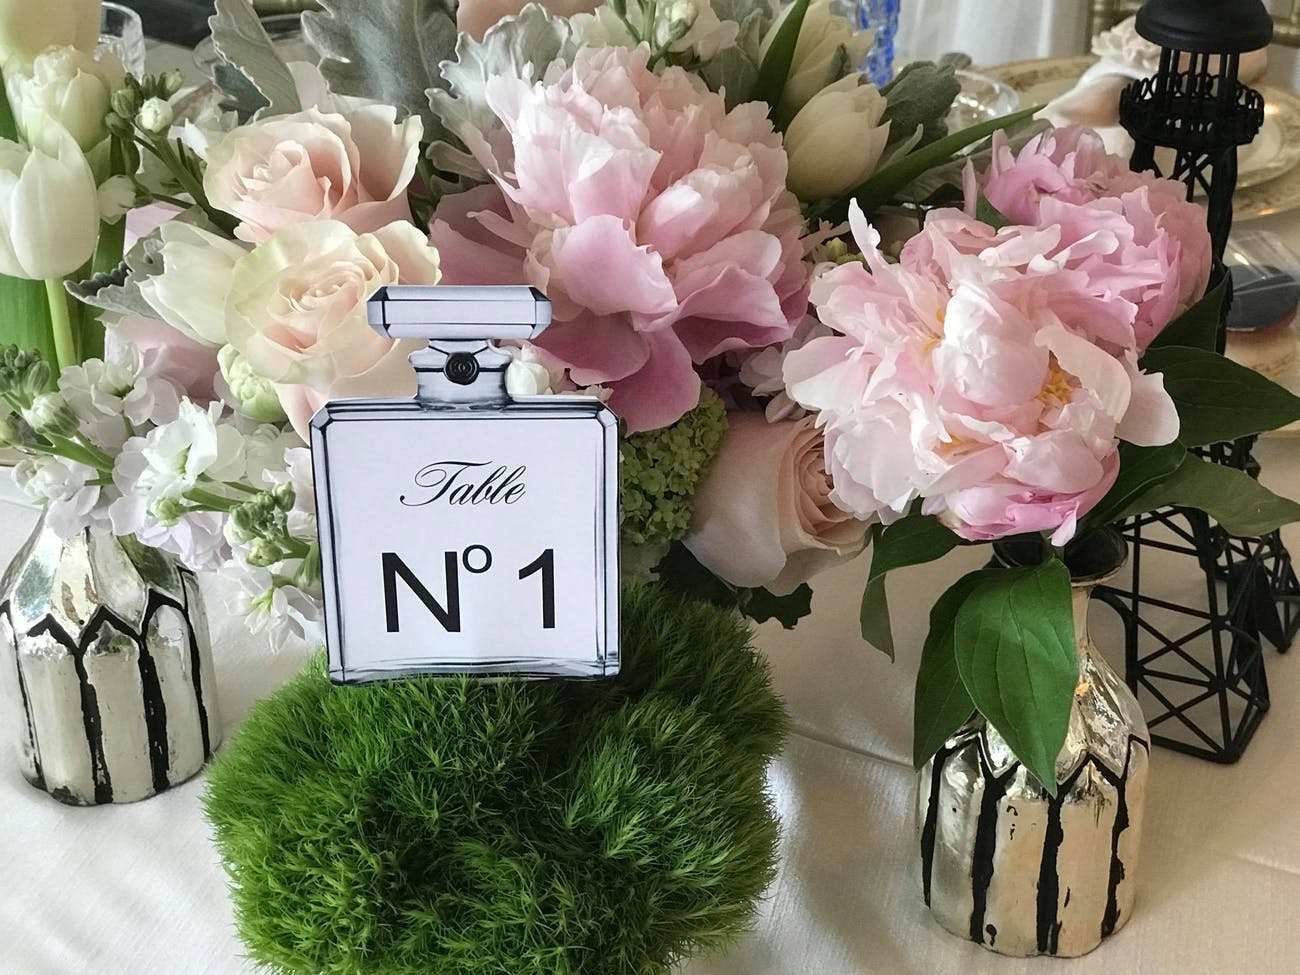 Table Number Written on a Perfume Bottle with Flowers